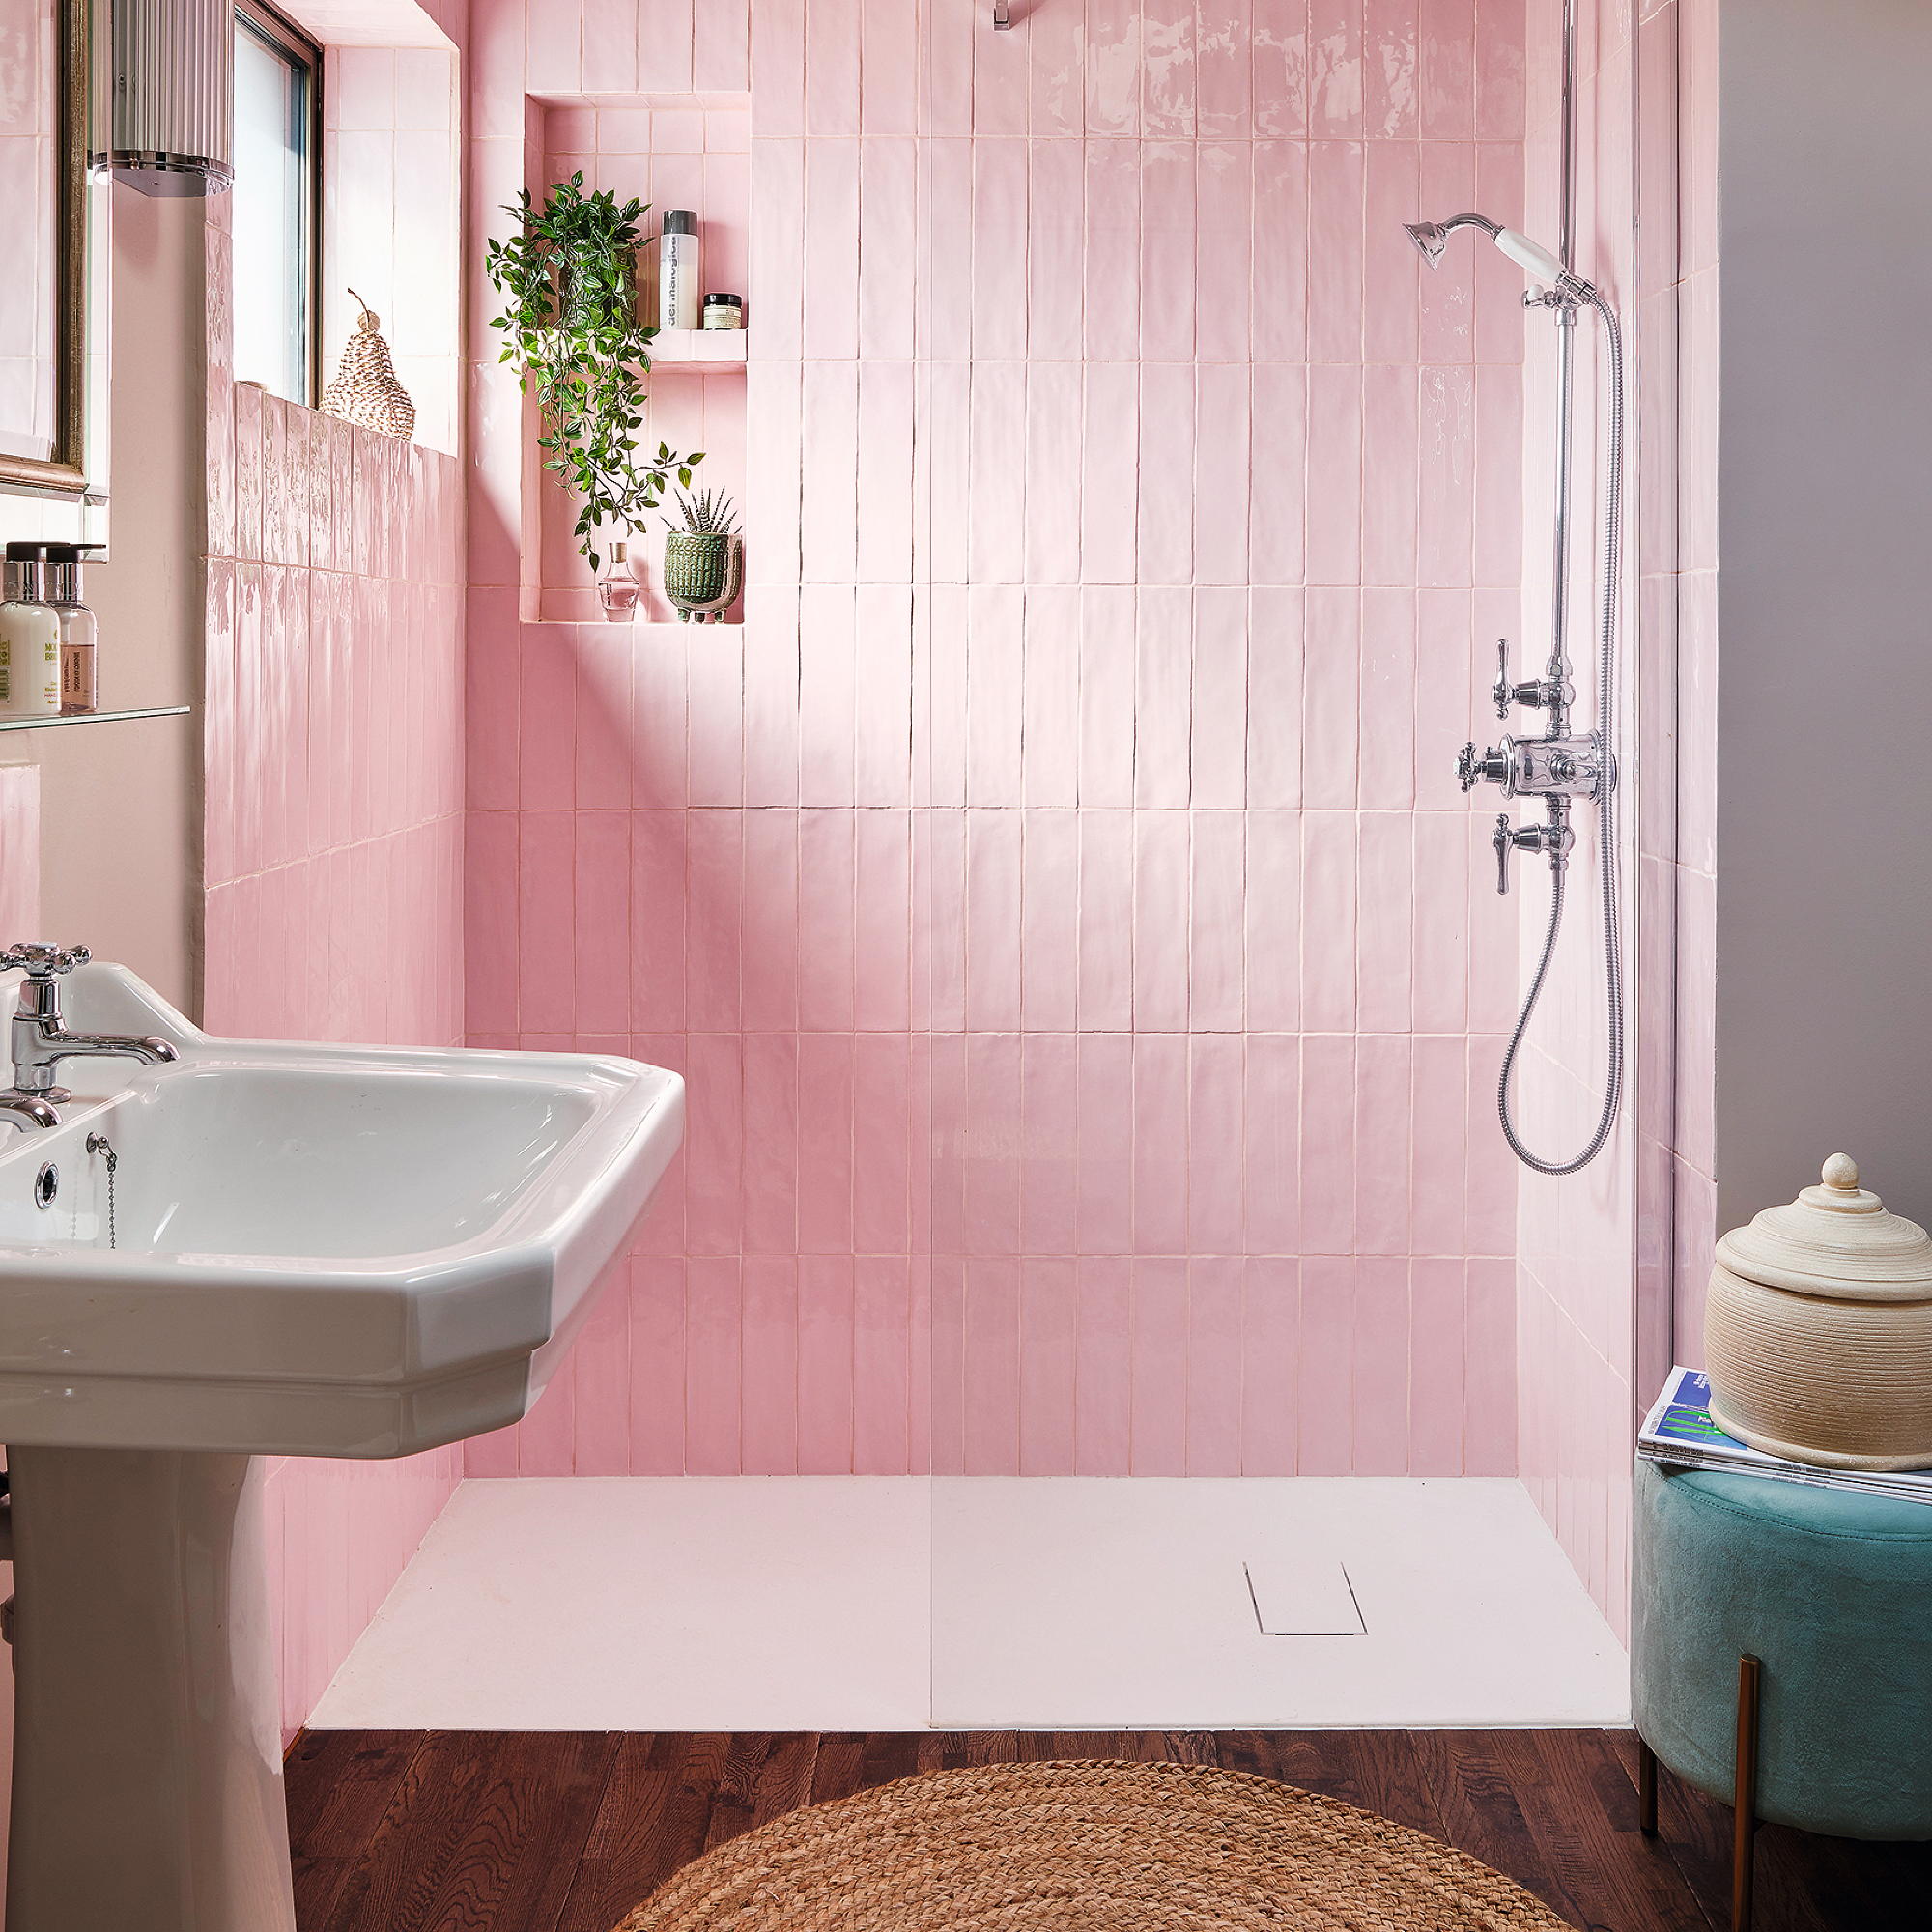 Bathroom colour schemes – how to use paint and decor | Ideal Home